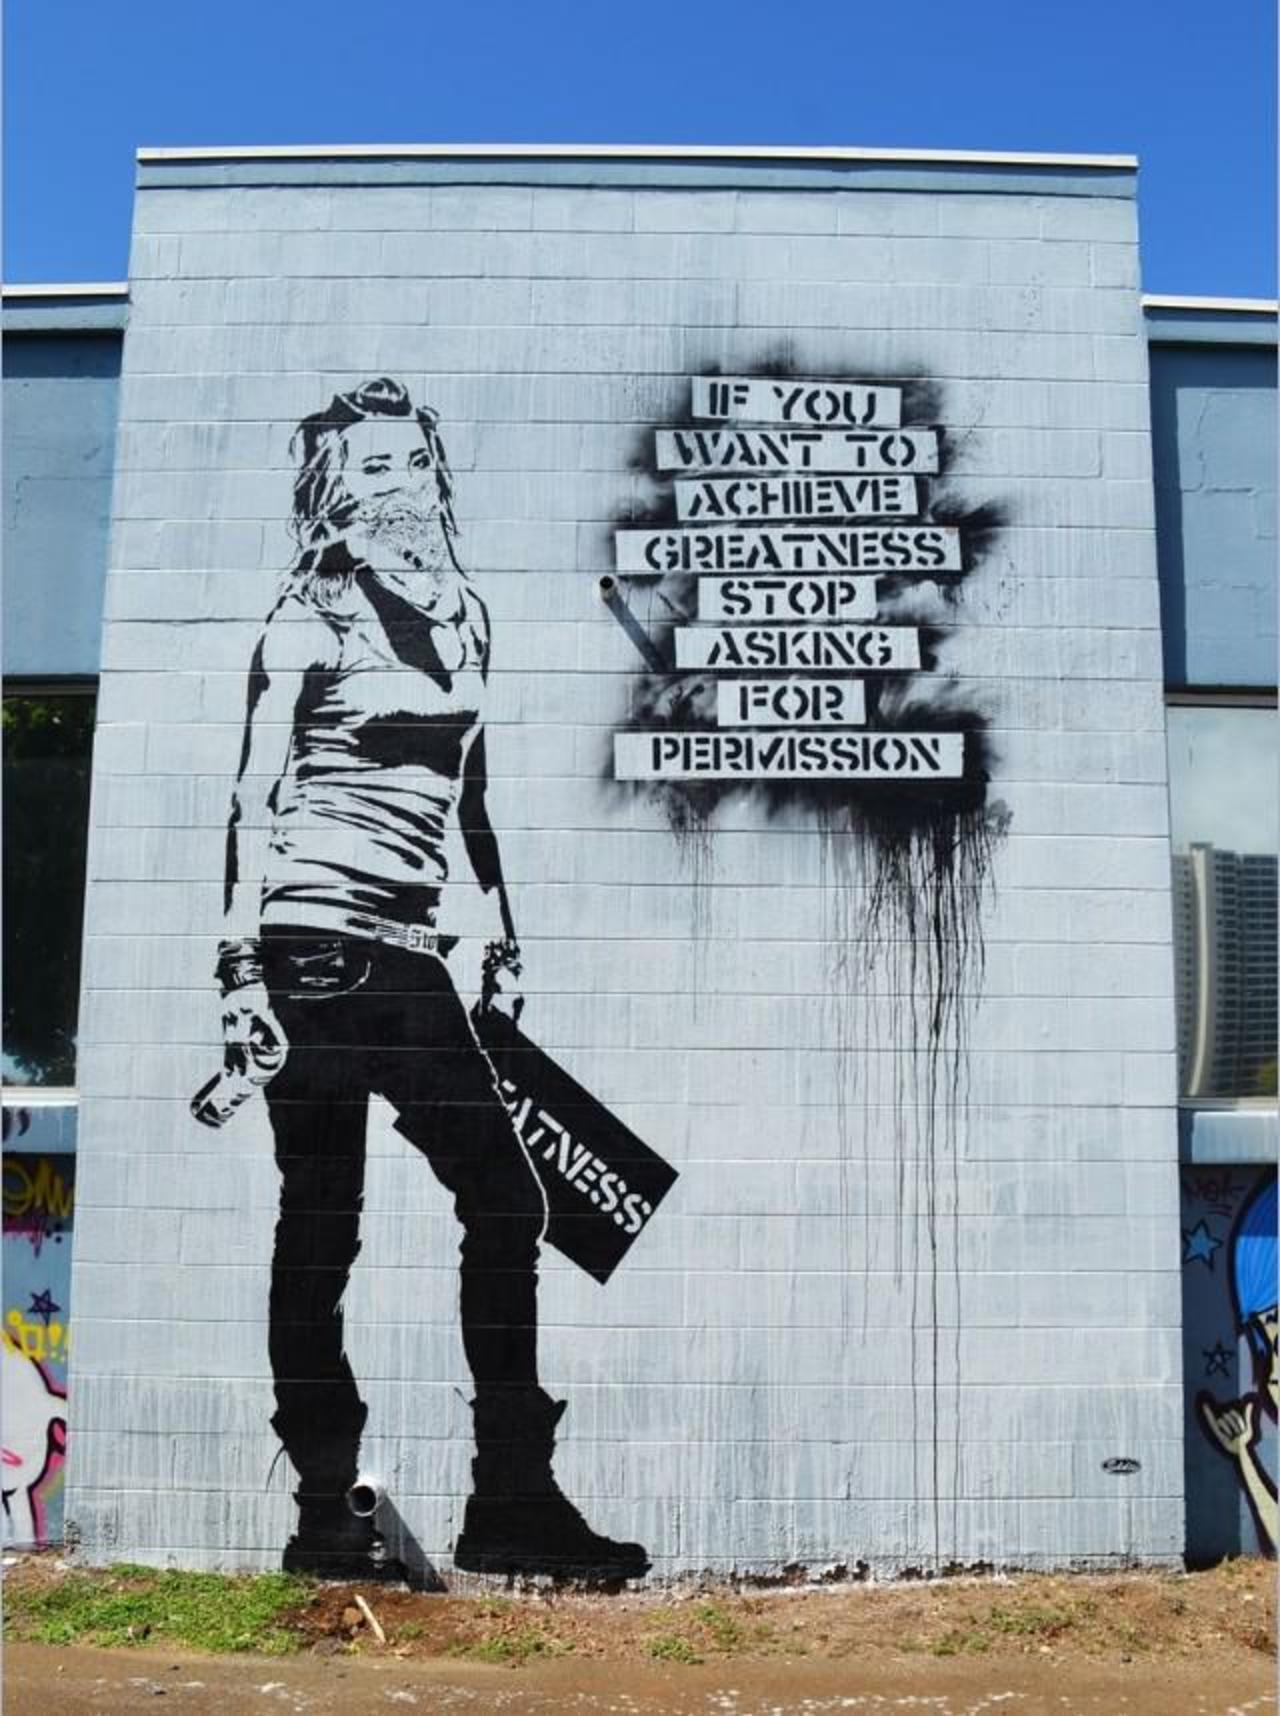 If you want to achieve greatness 

Street Art by Eddie Colla 
#art #mural #graffiti #streetart http://t.co/33Ci7nRv96